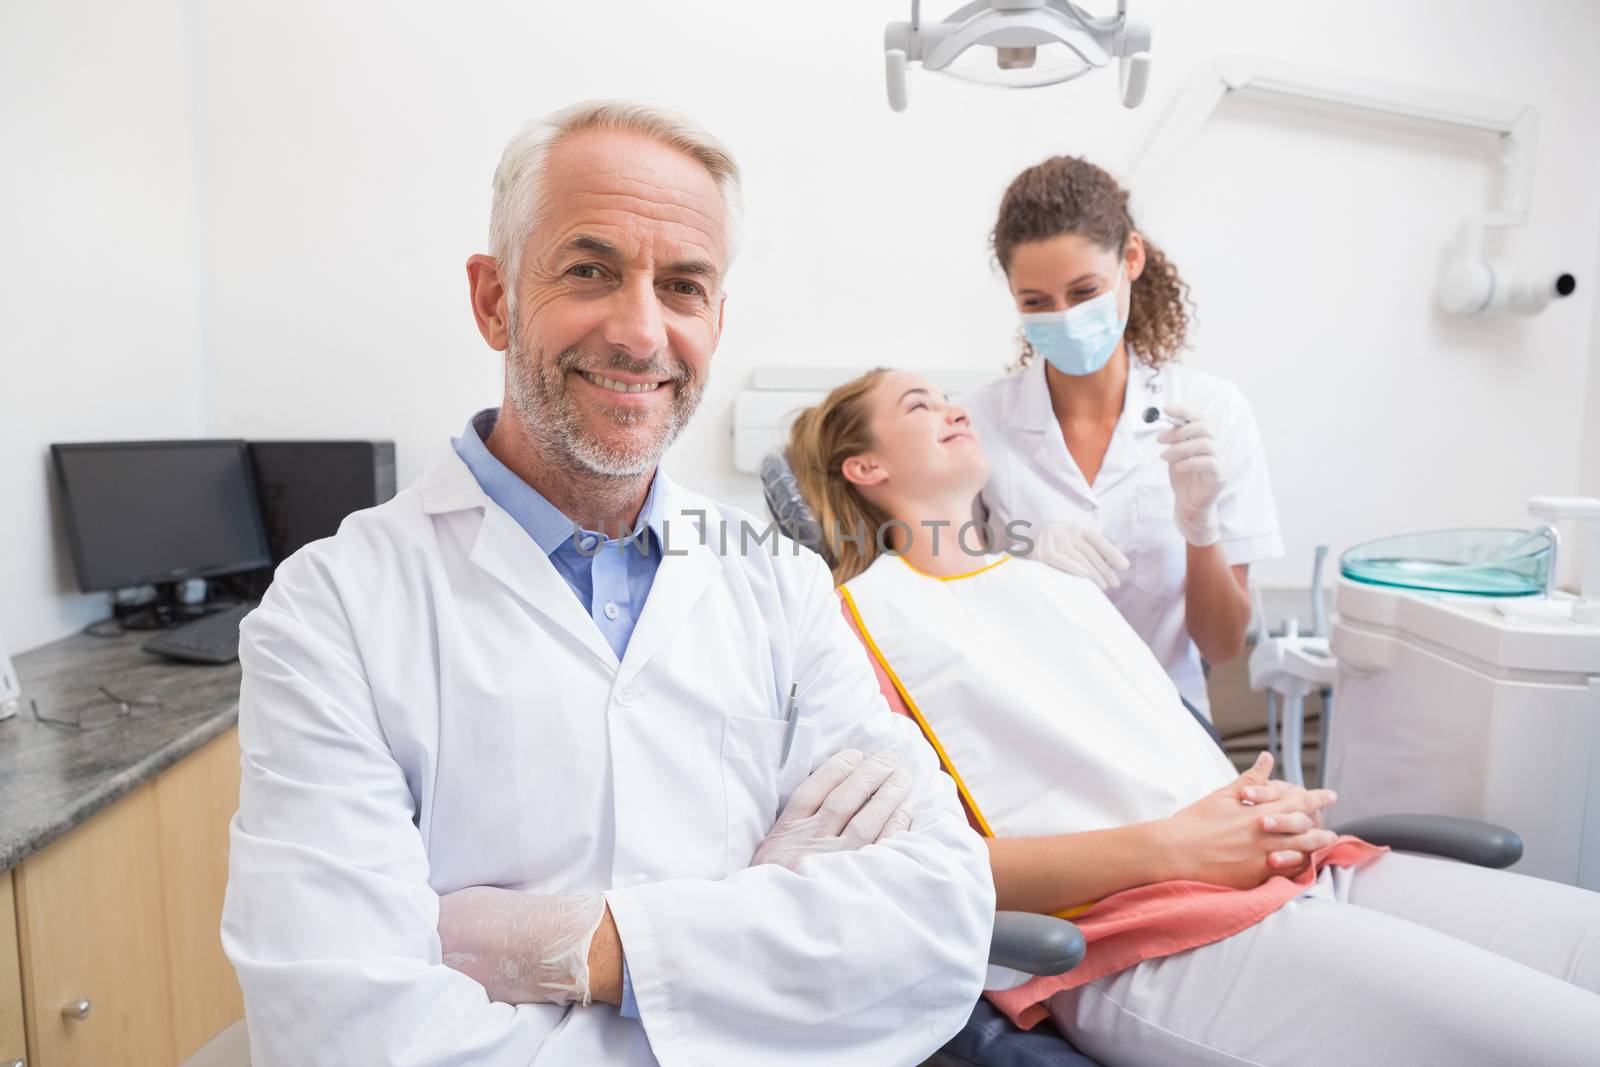 Dentist smiling at camera with assistant and patient behind by Wavebreakmedia